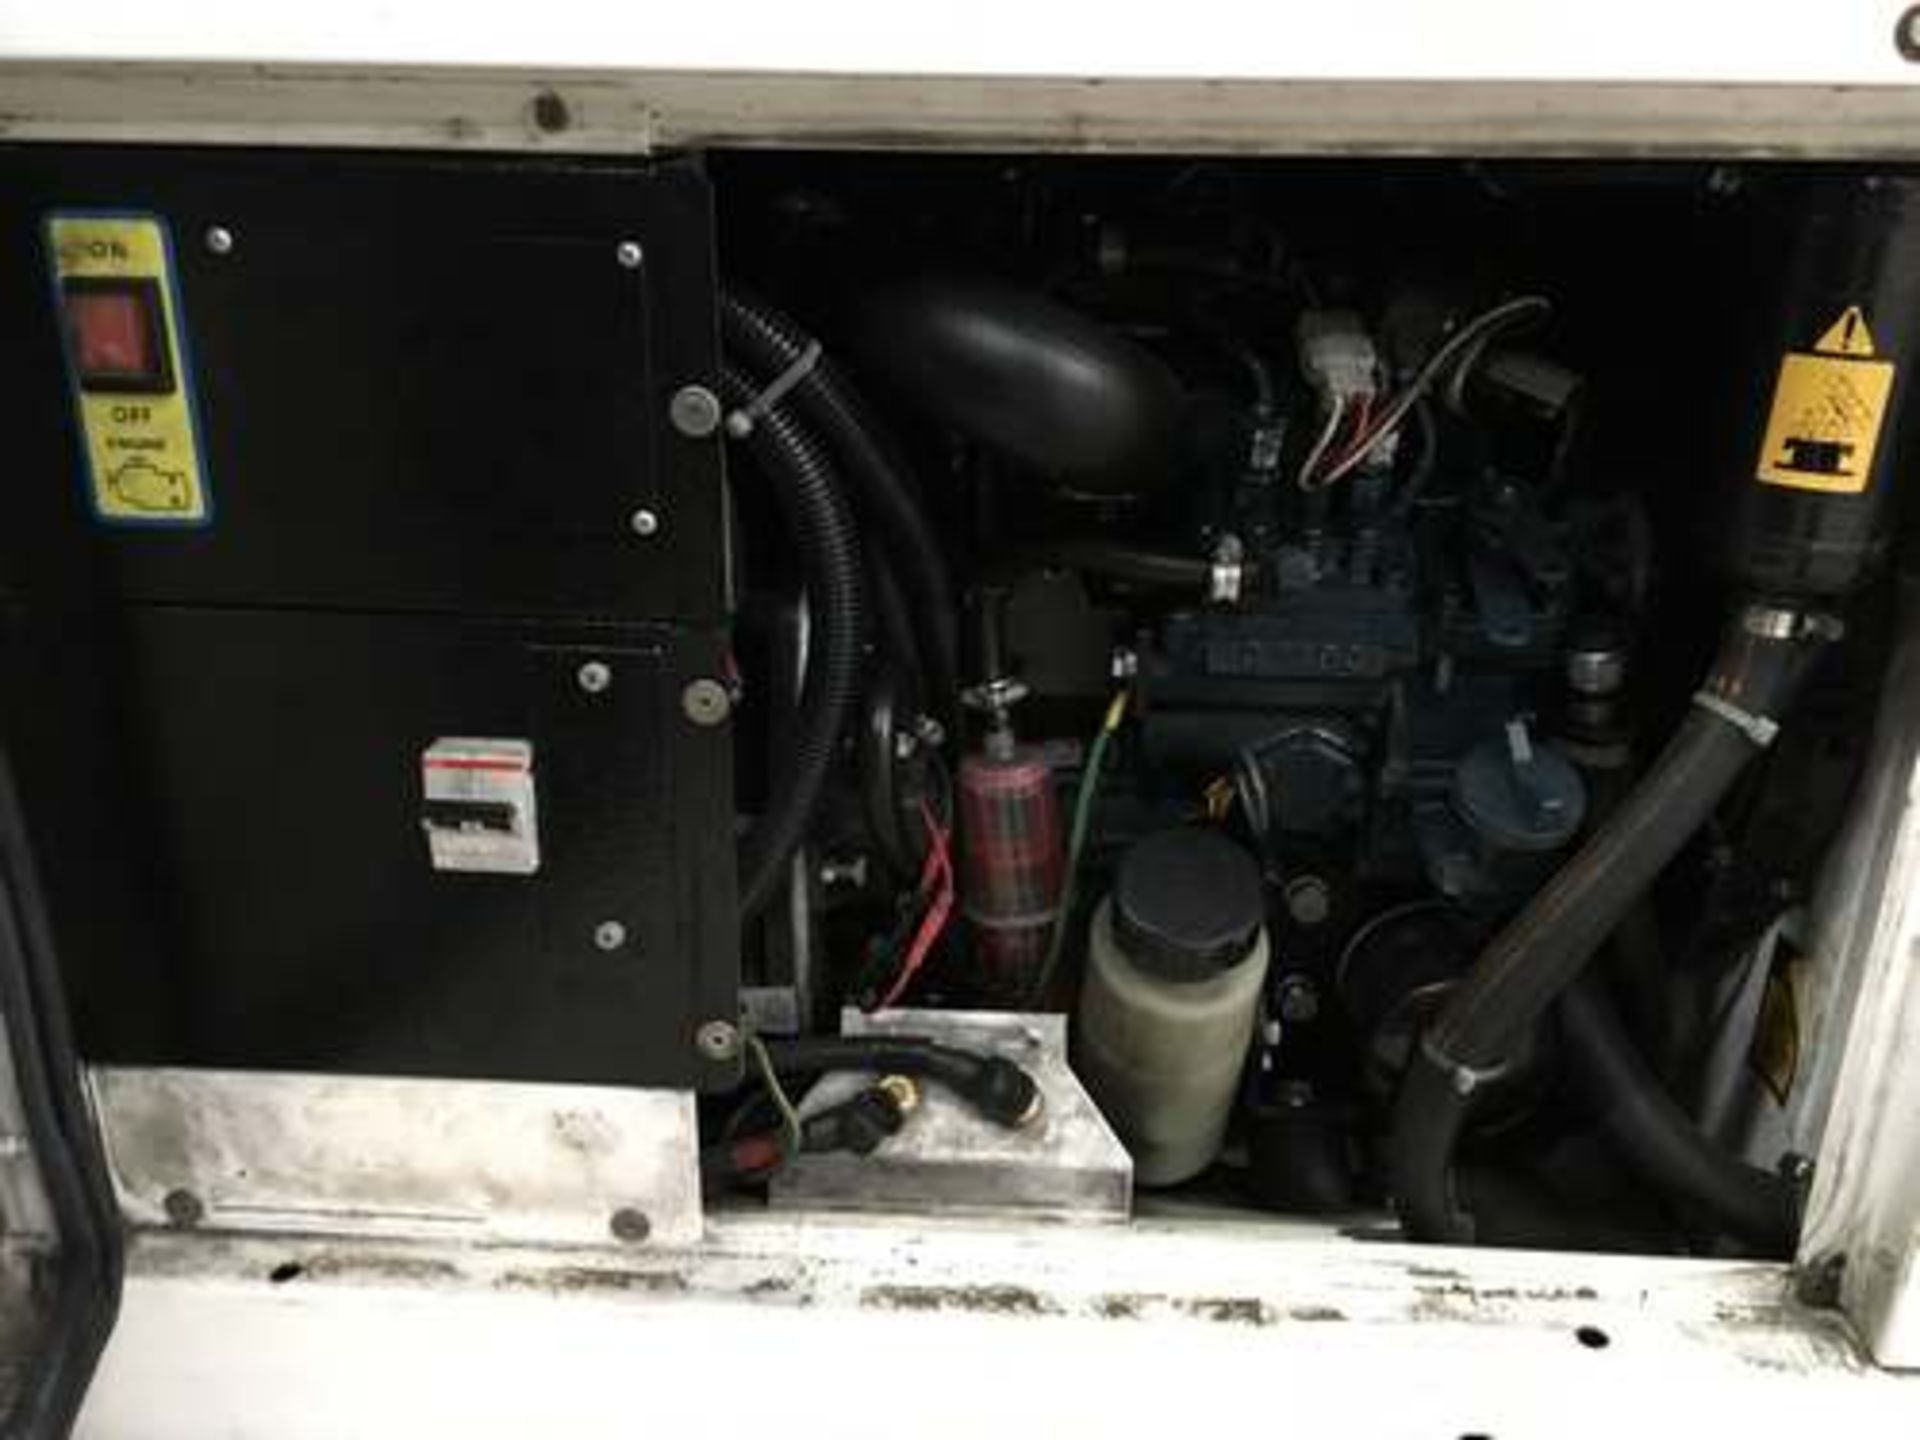 RENAULT MASTER LL35 DCI 125 - 2298cc - Image 16 of 33